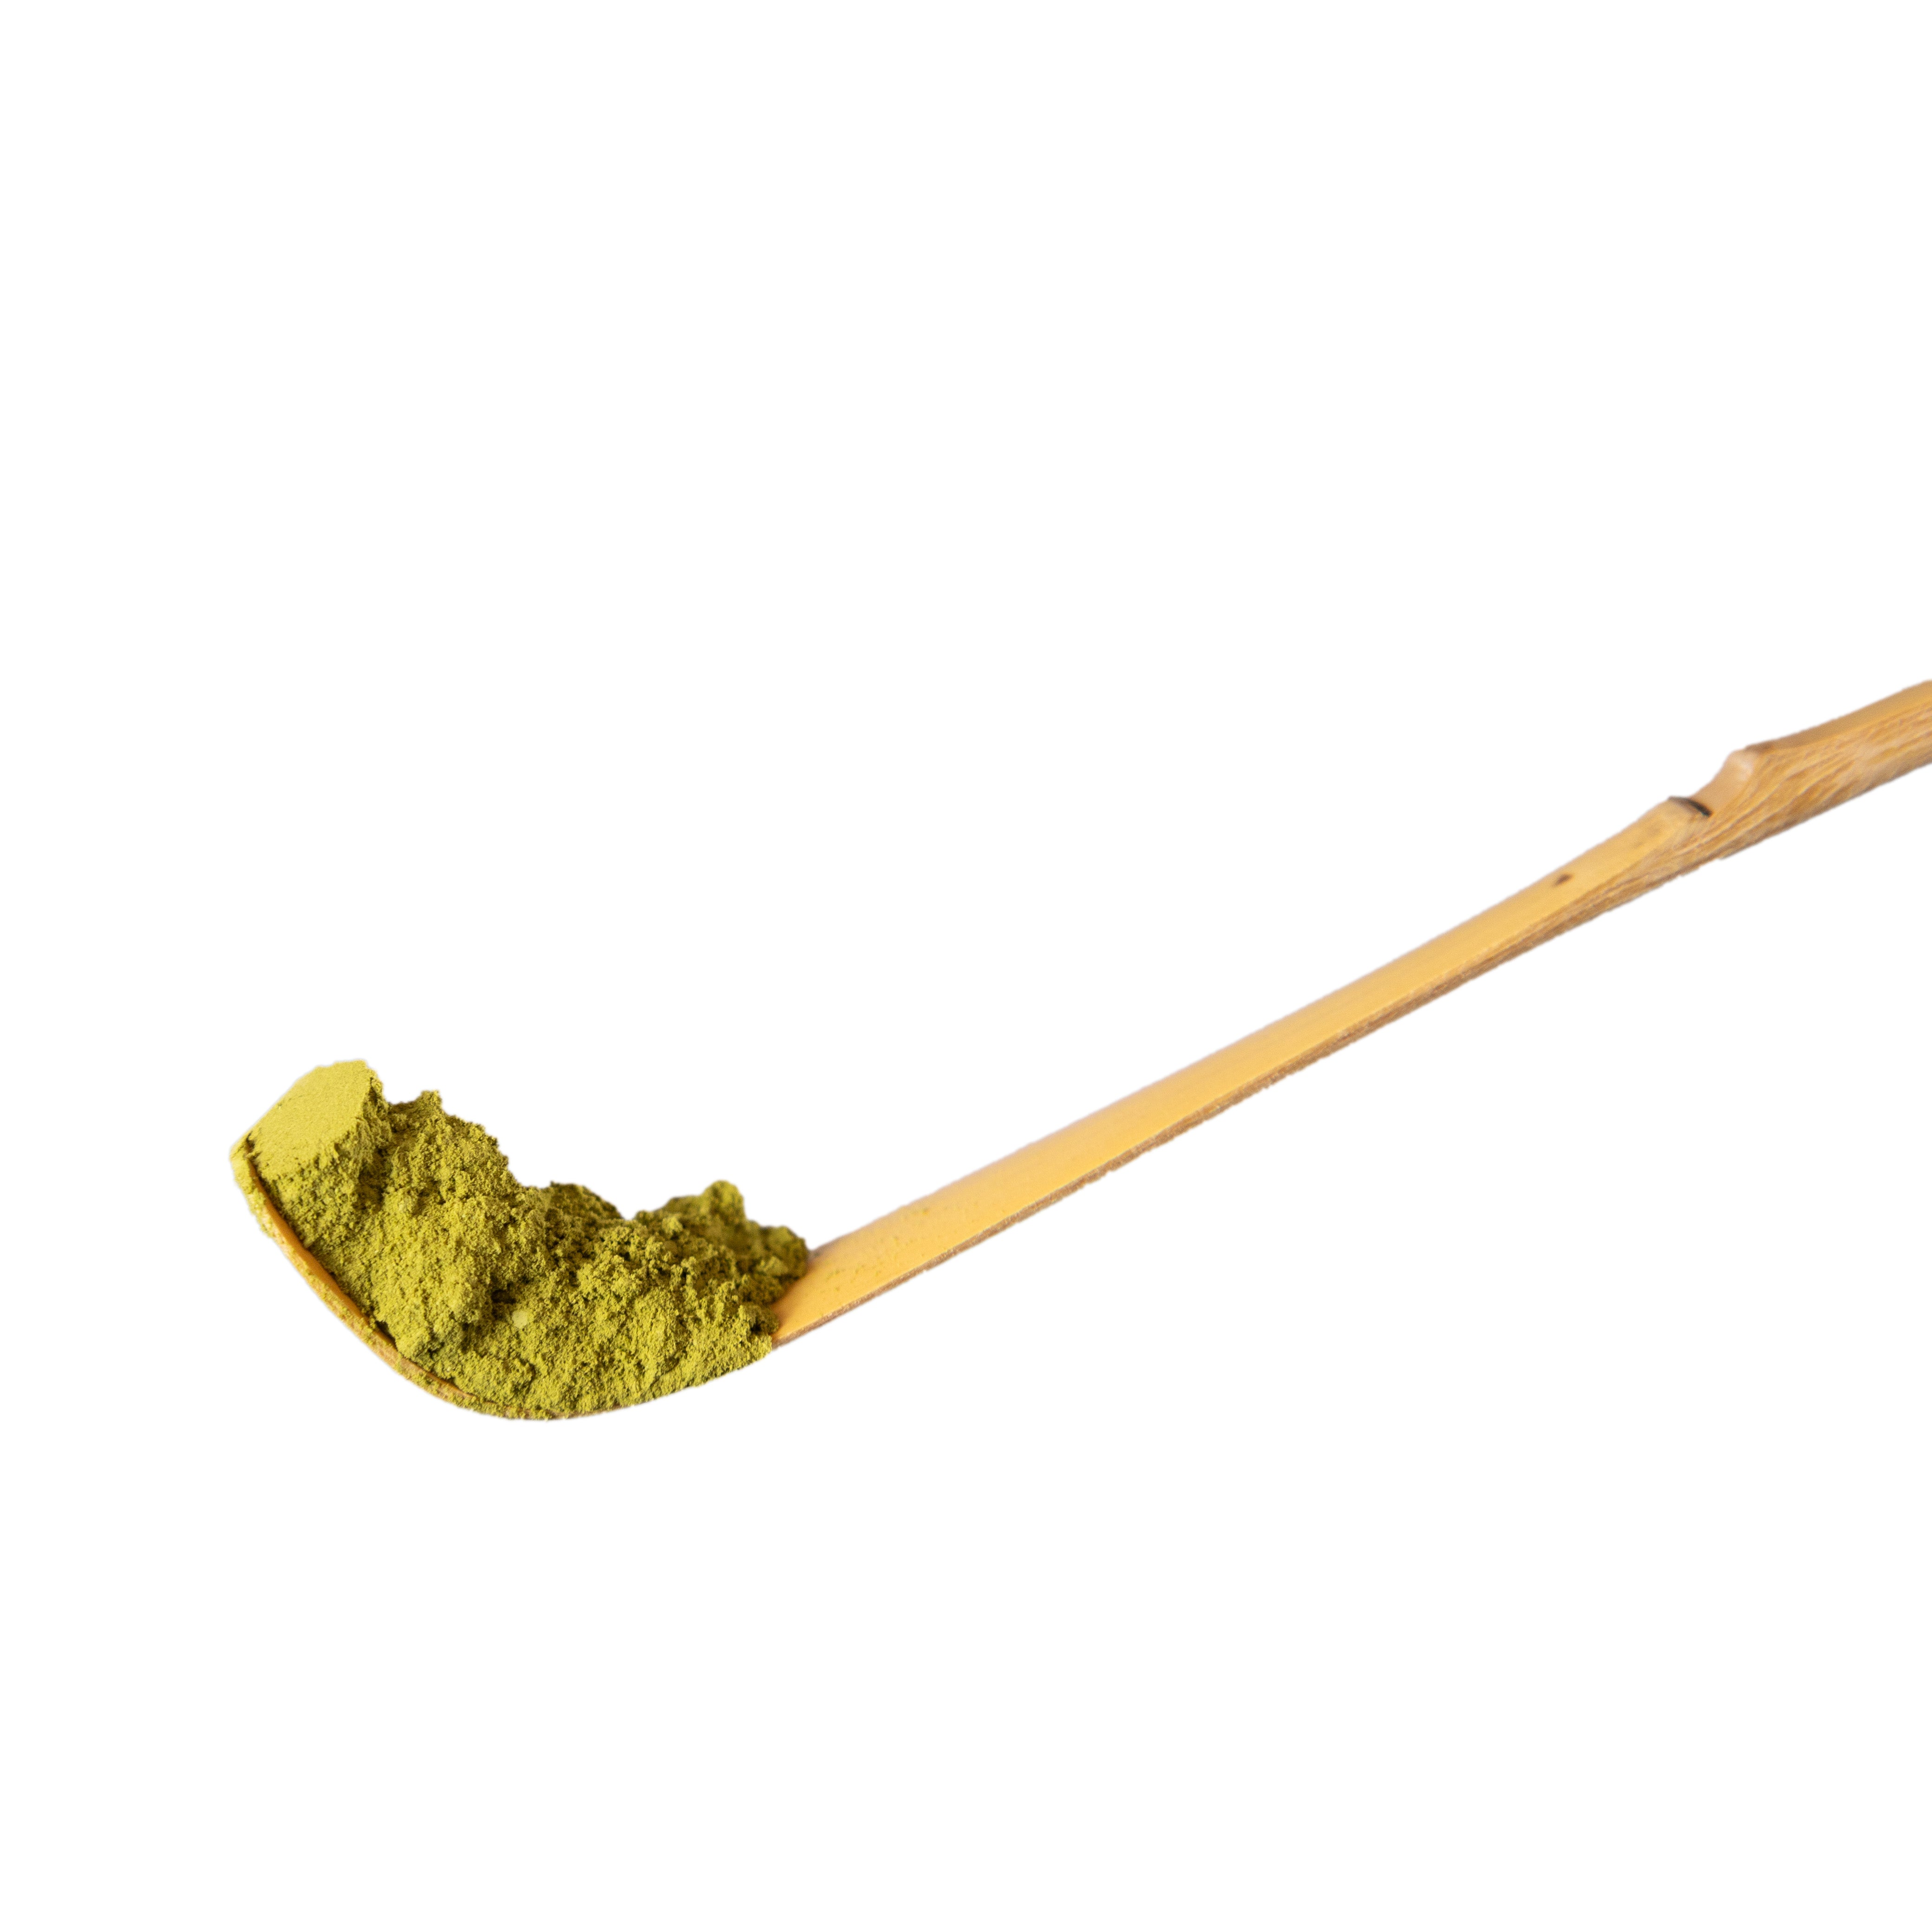 Japanese Bamboo Matcha Spoon For Sale | The Whistling Kettle